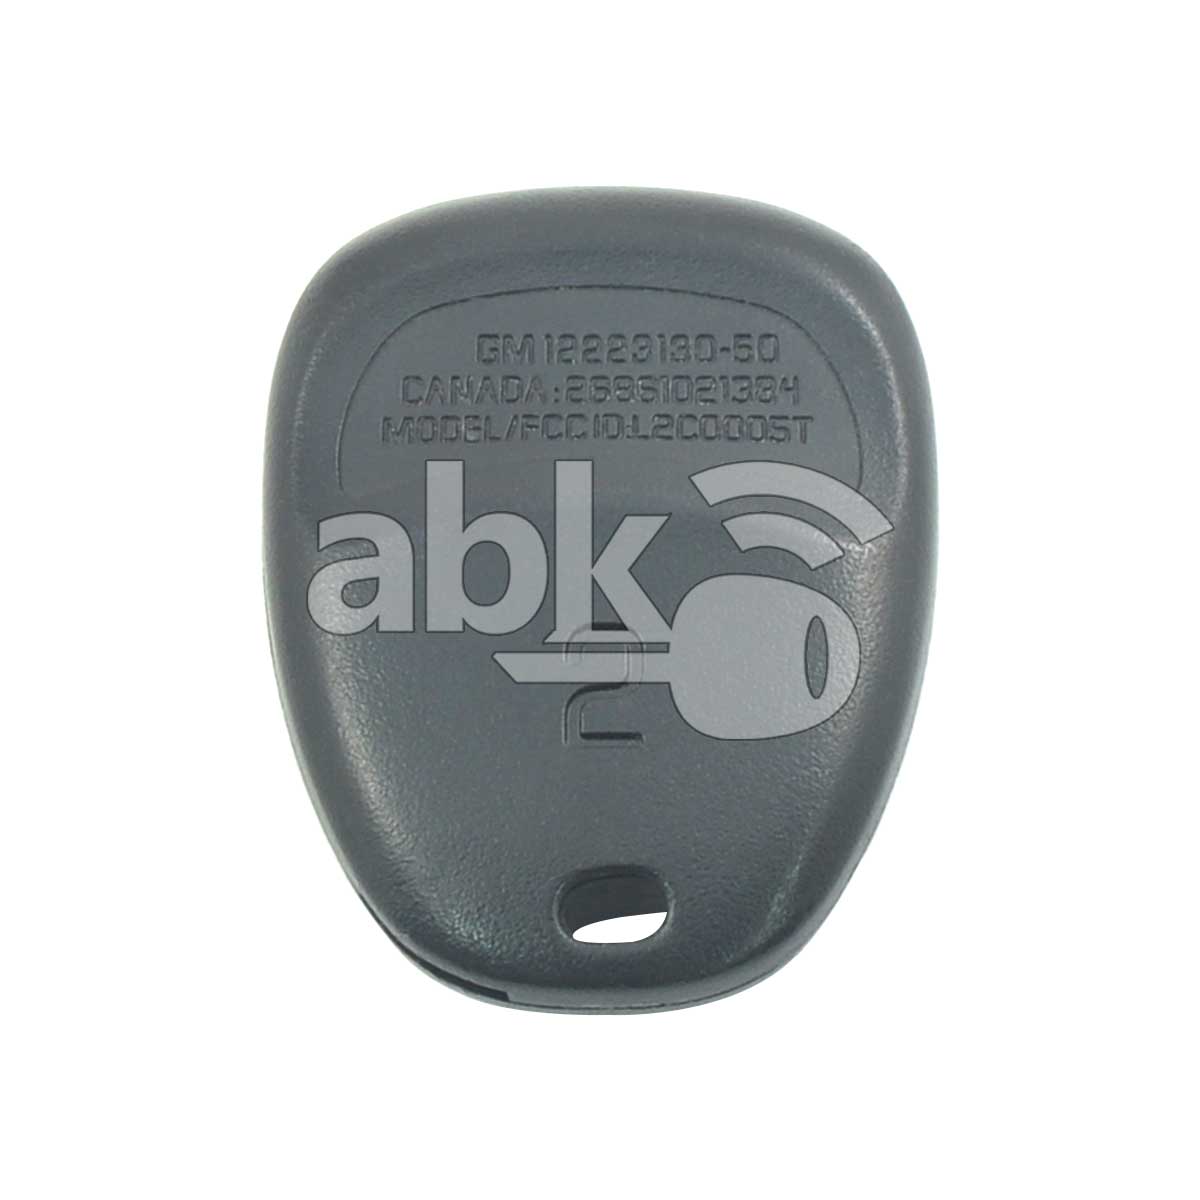 Genuine Cadillac CTS SRX 2003+ Remote Control 4Buttons 12223132 315MHz L2C0005T - ABK-685 -